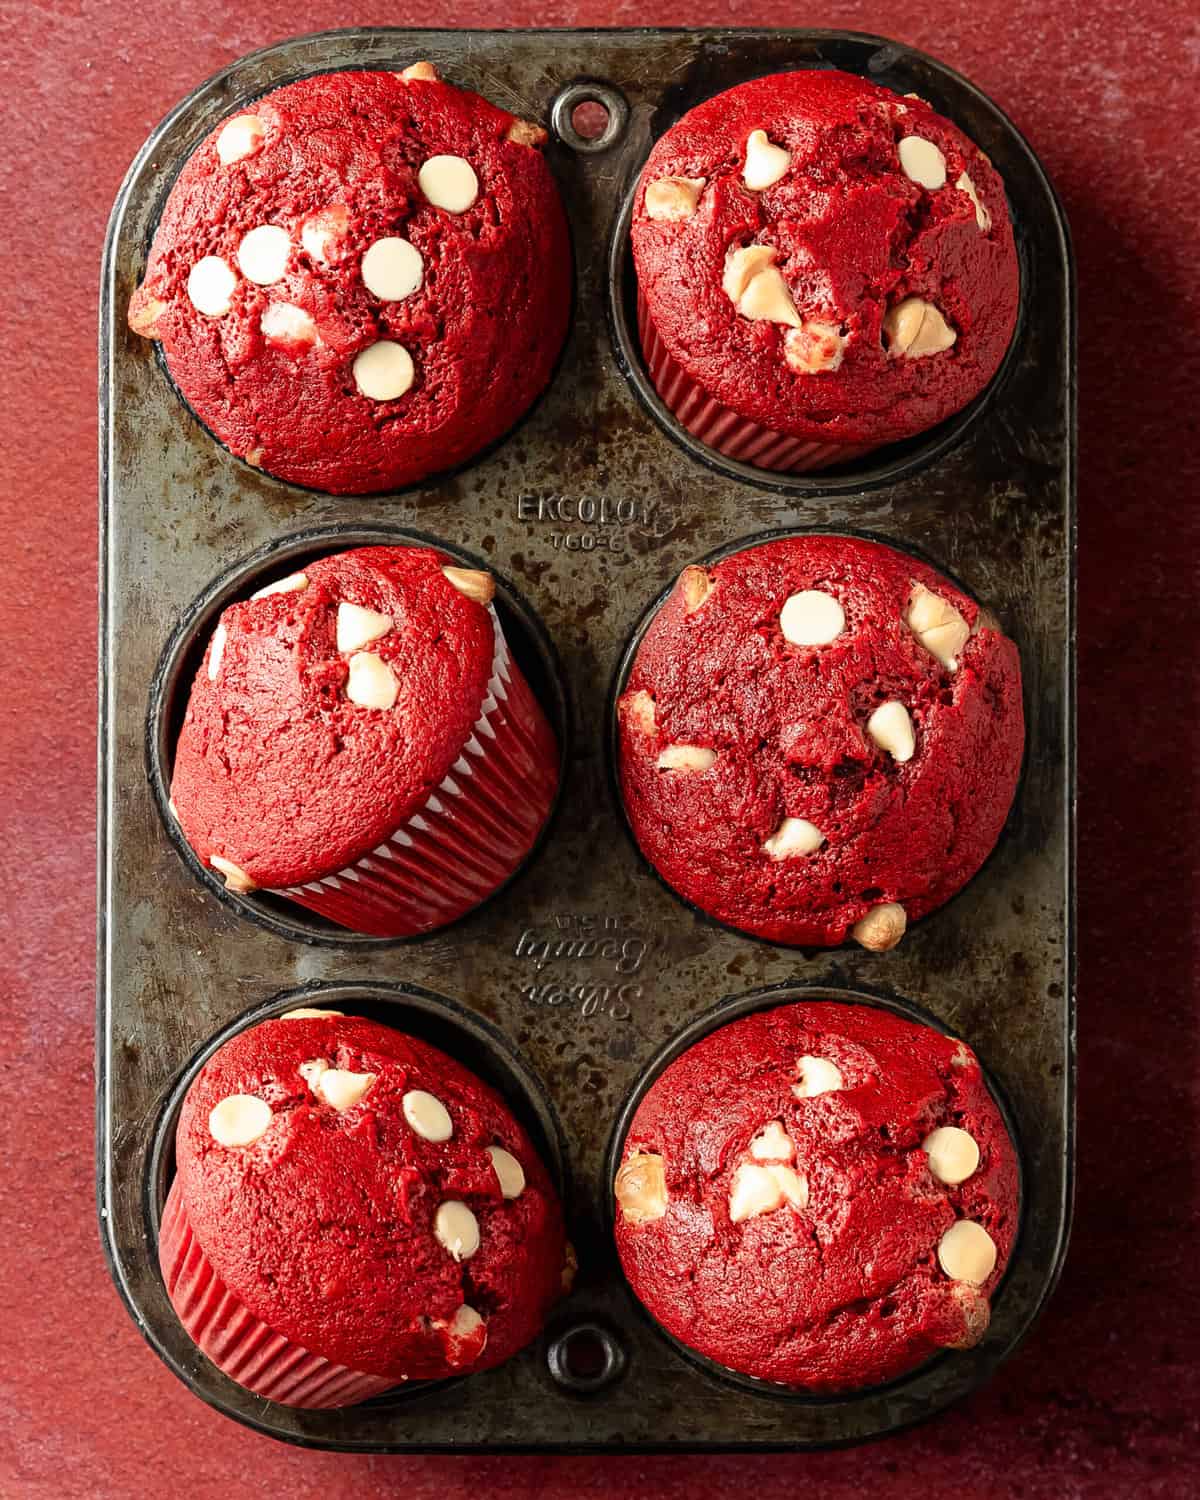 Red velvet muffins are soft, moist and fluffy bakery style muffins that taste and look just like a classic red velvet cake. White chocolate chips are studded throughout these vibrant velvet muffins for the perfect color and flavor contrast. These red velvet white chocolate muffins are the perfect quick and easy to make breakfast for any occasion.  